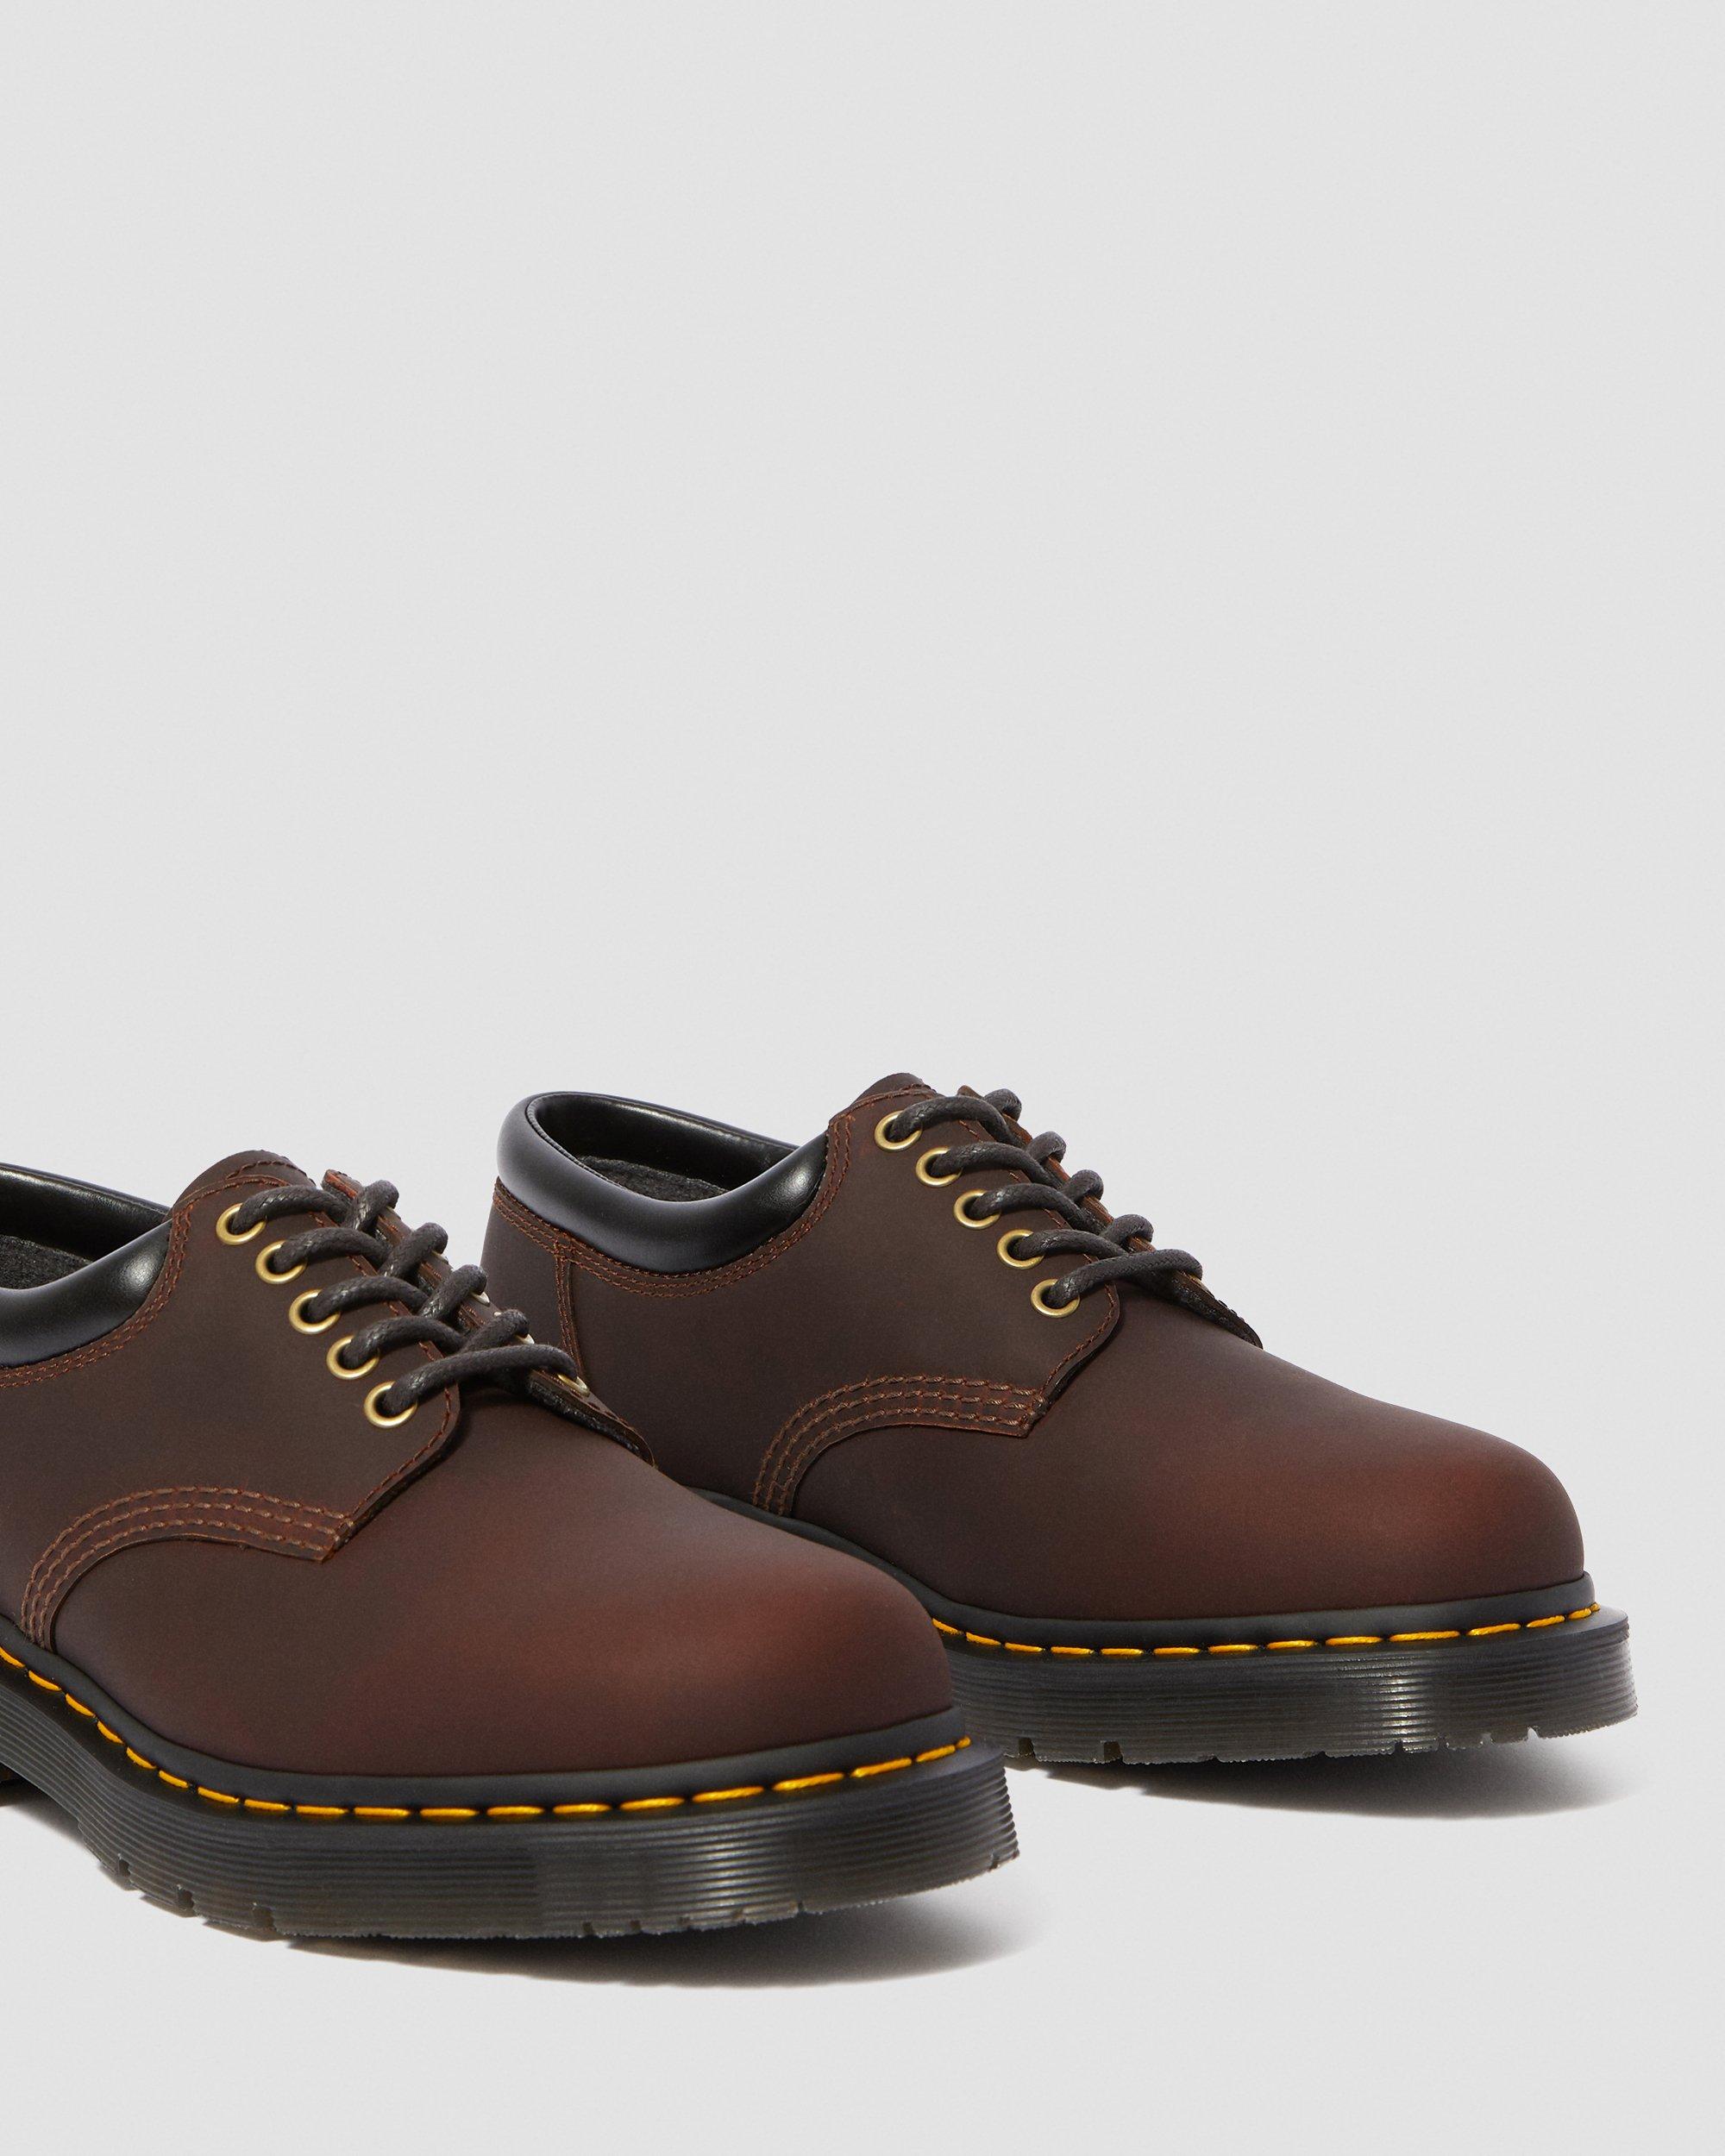 8053 DM'S WINTERGRIP PADDED COLLAR SHOES | Dr. Martens